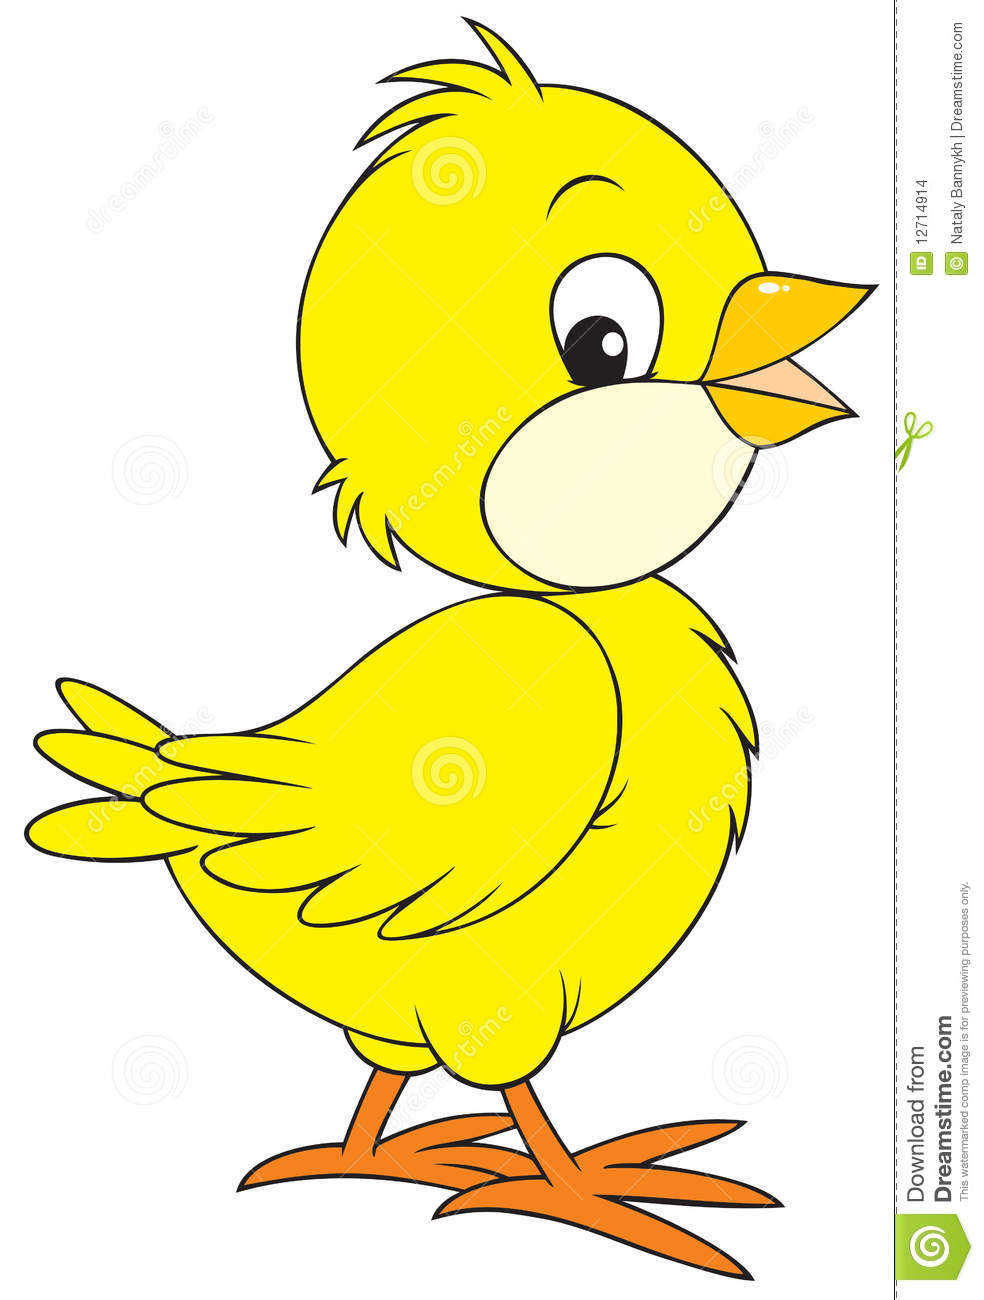 Chick clipart #11, Download drawings